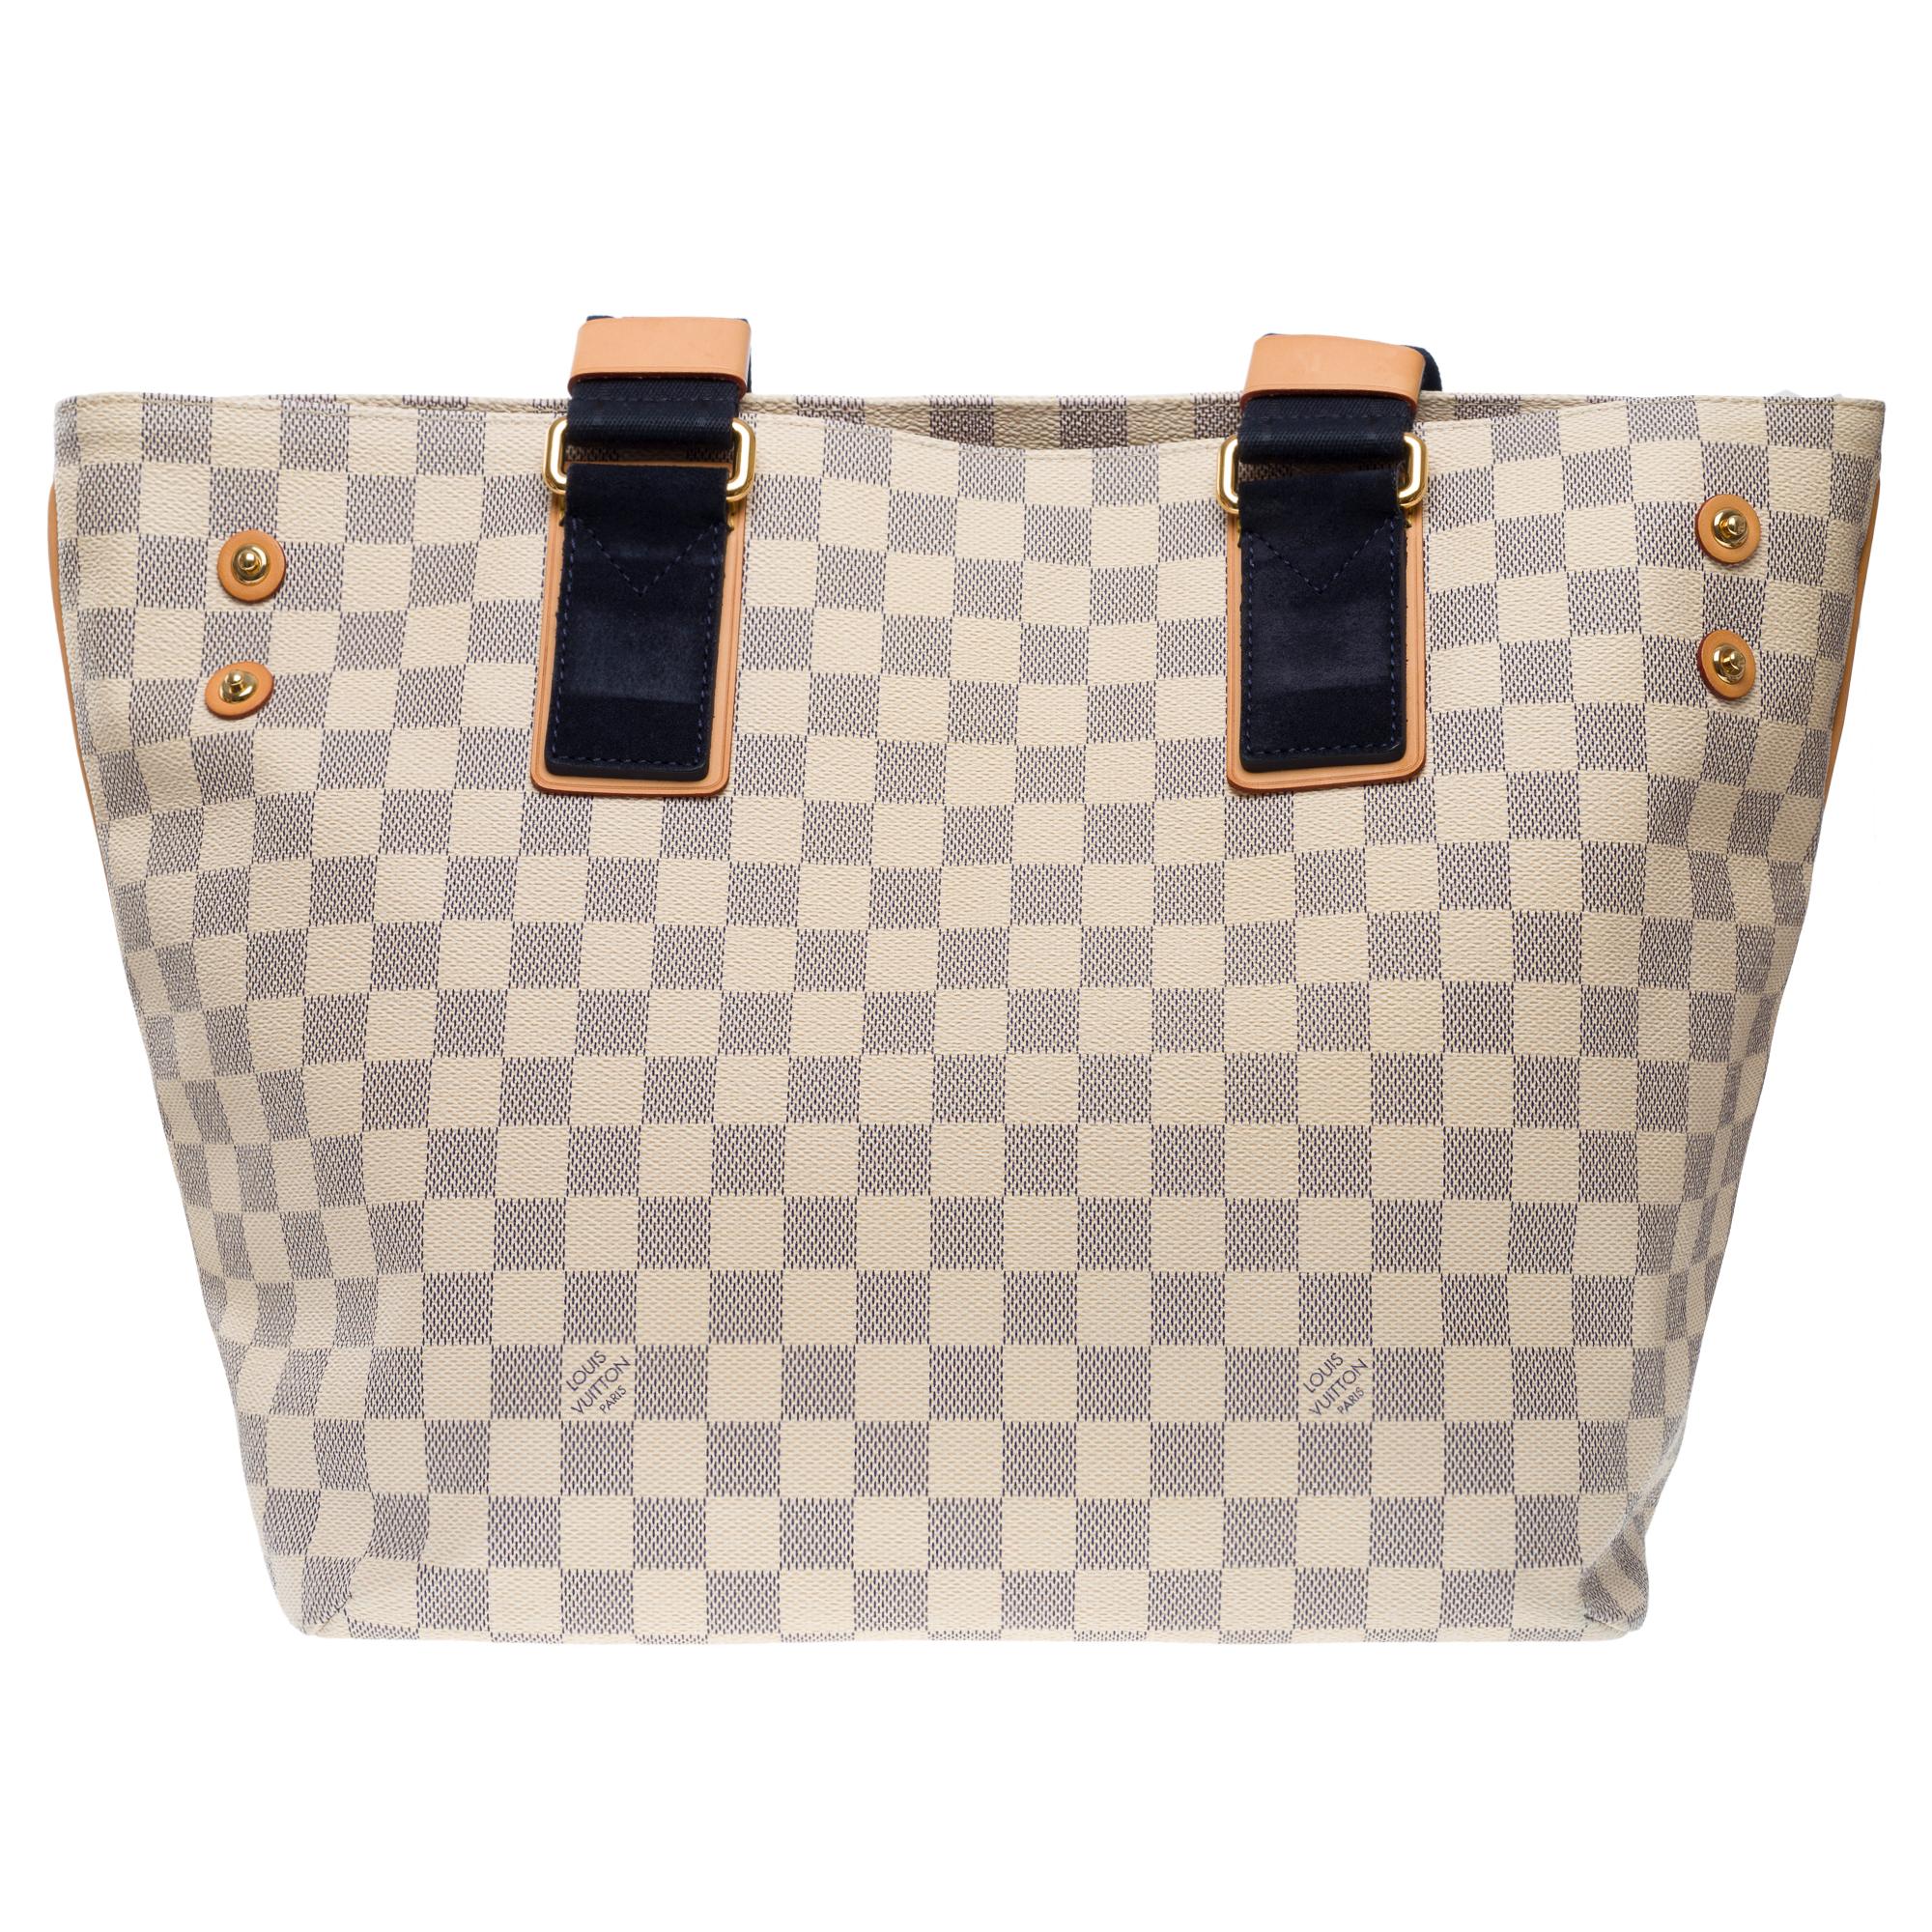 Women's Amazing Louis Vuitton Tote bag in azur checkered canvas, GHW For Sale